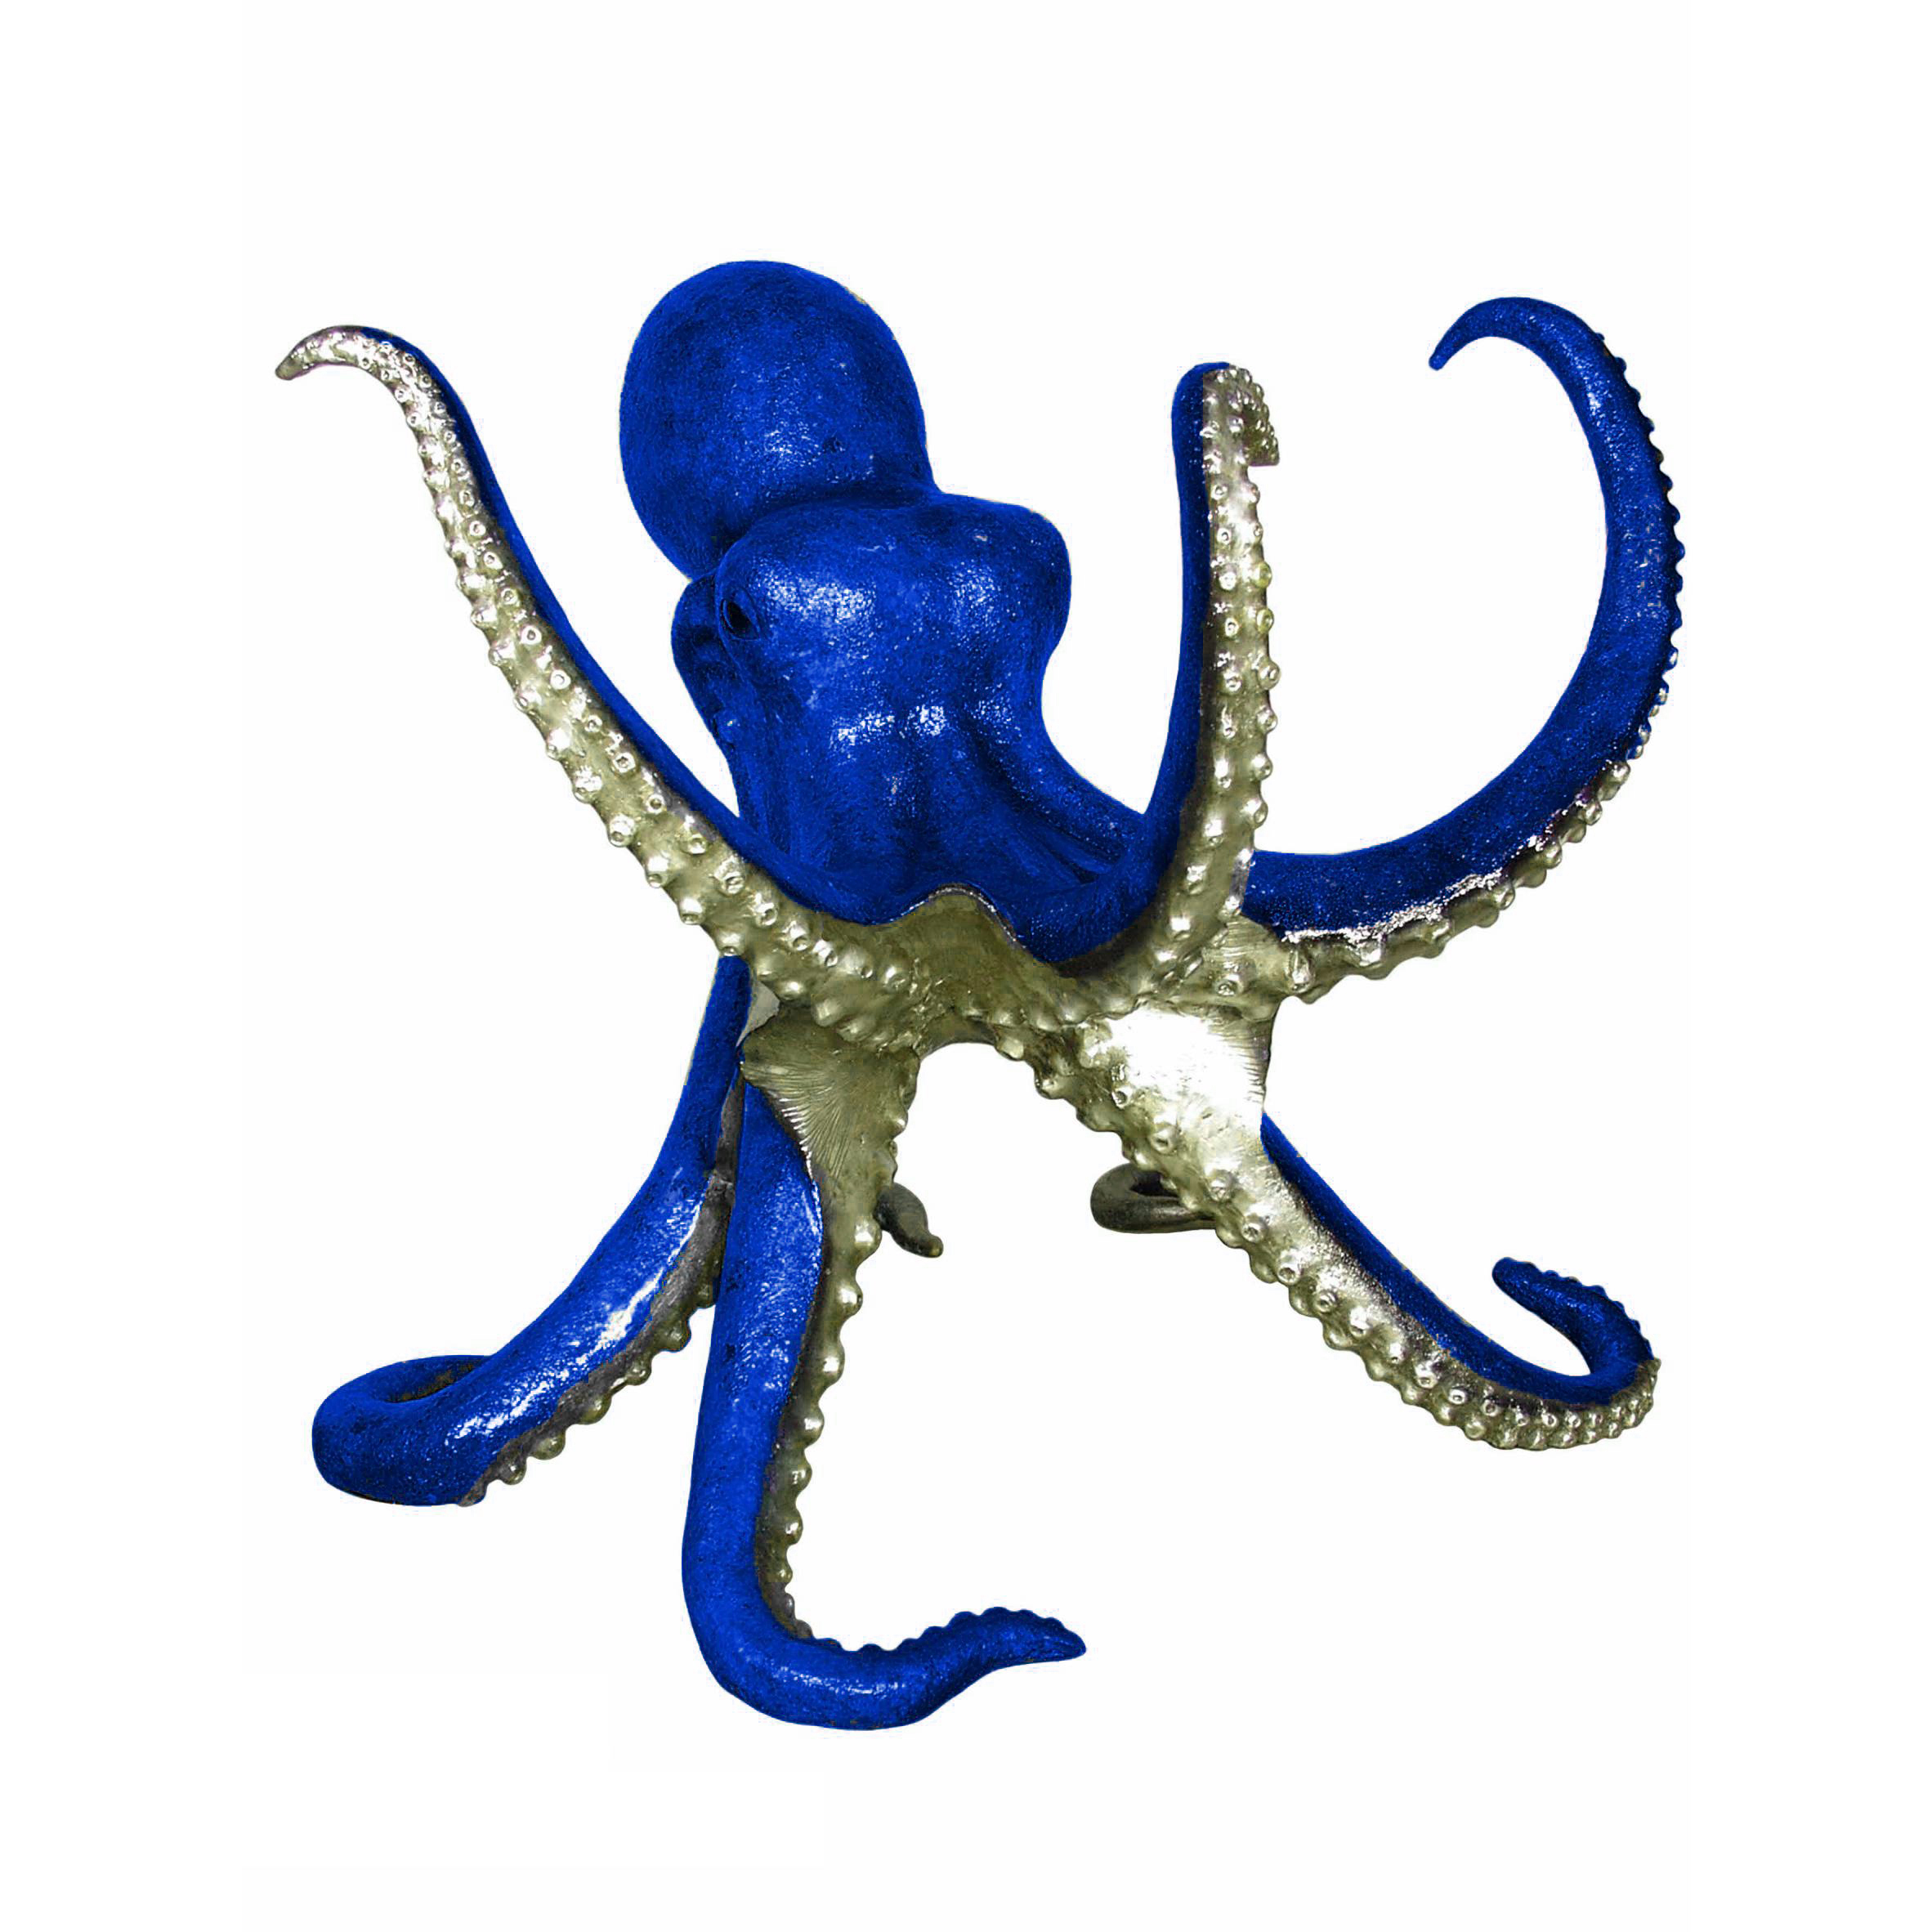 SRB089051-RB Bronze Colorful Octopus Sculpture in Royal Blue by Metropolitan Galleries Inc